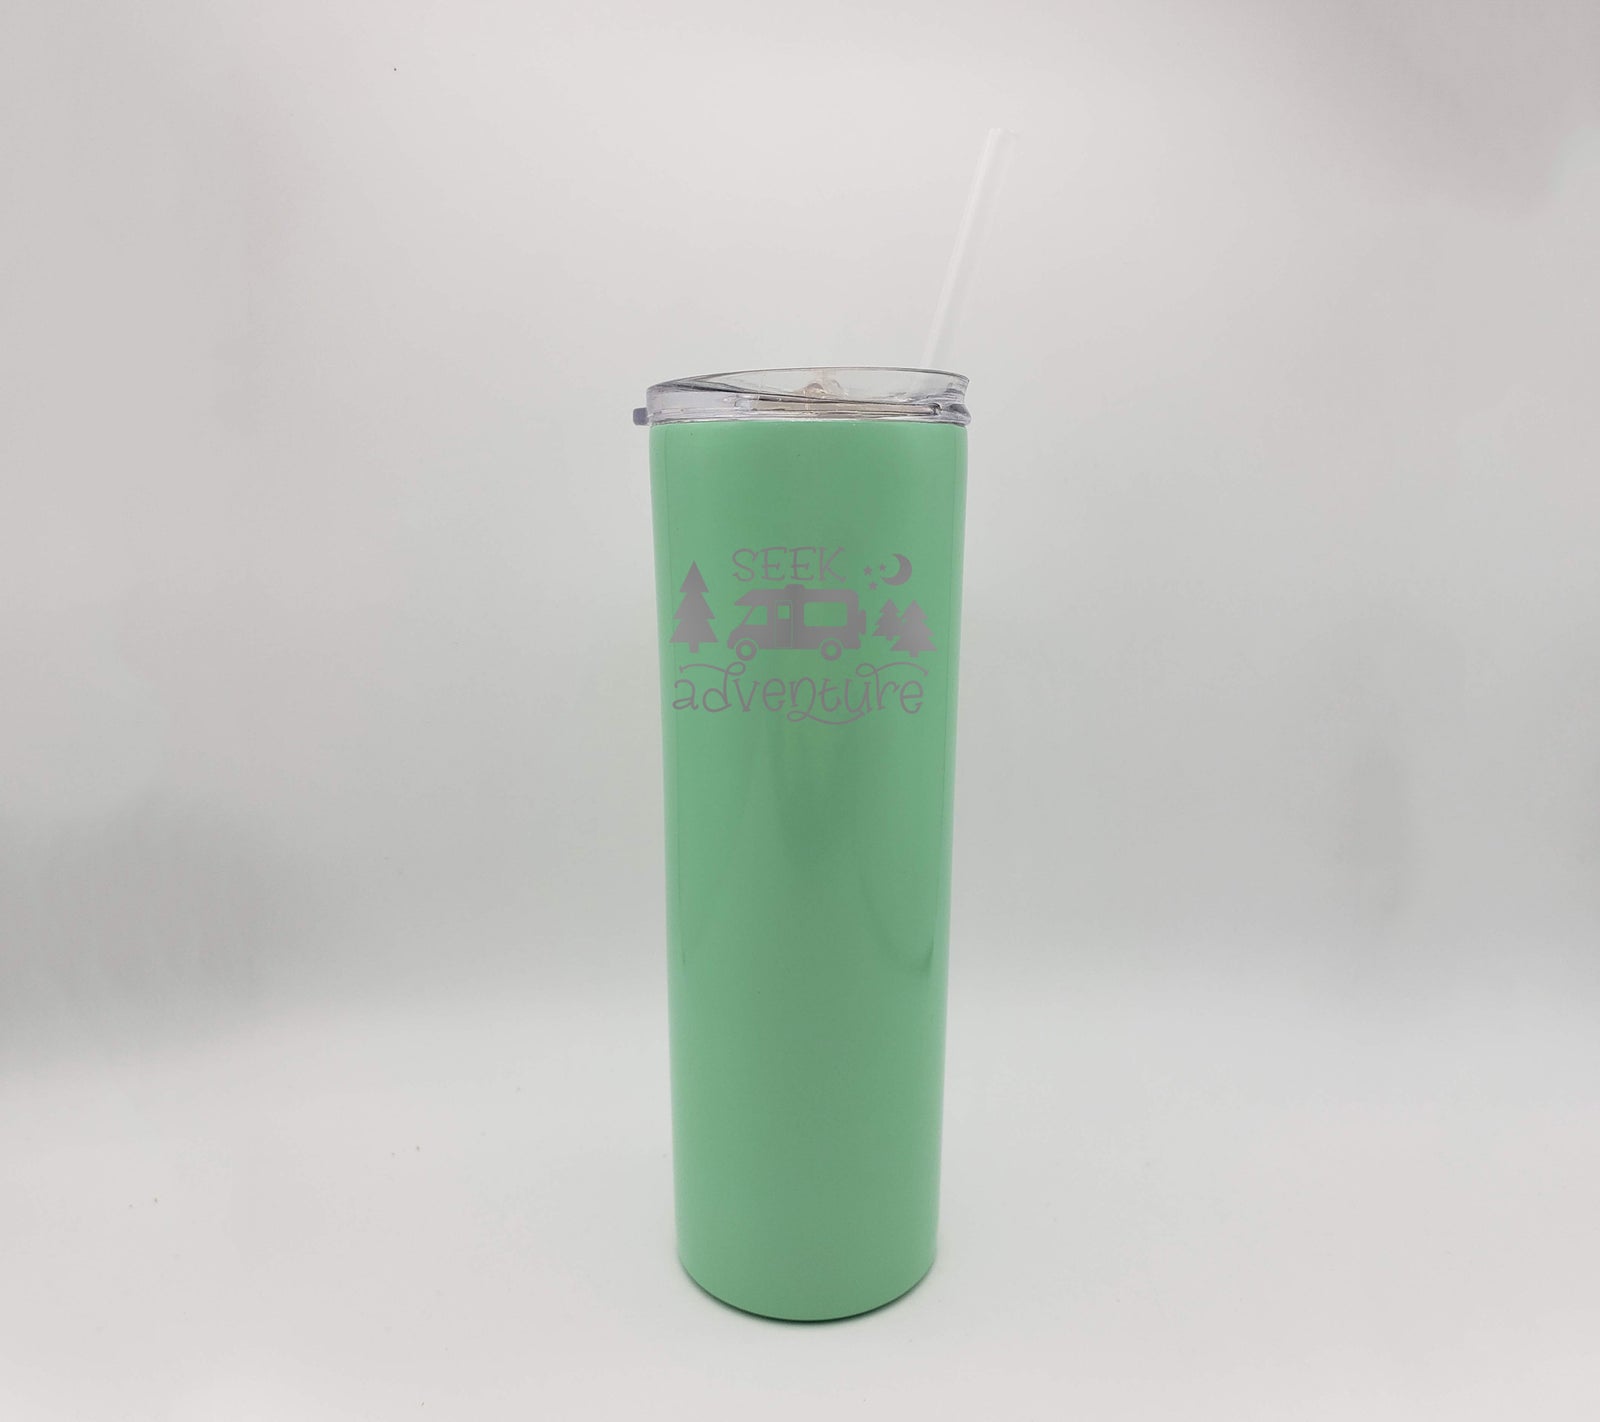 Just a Girls Who Love Camping Tumbler With Straw 20oz, Camping